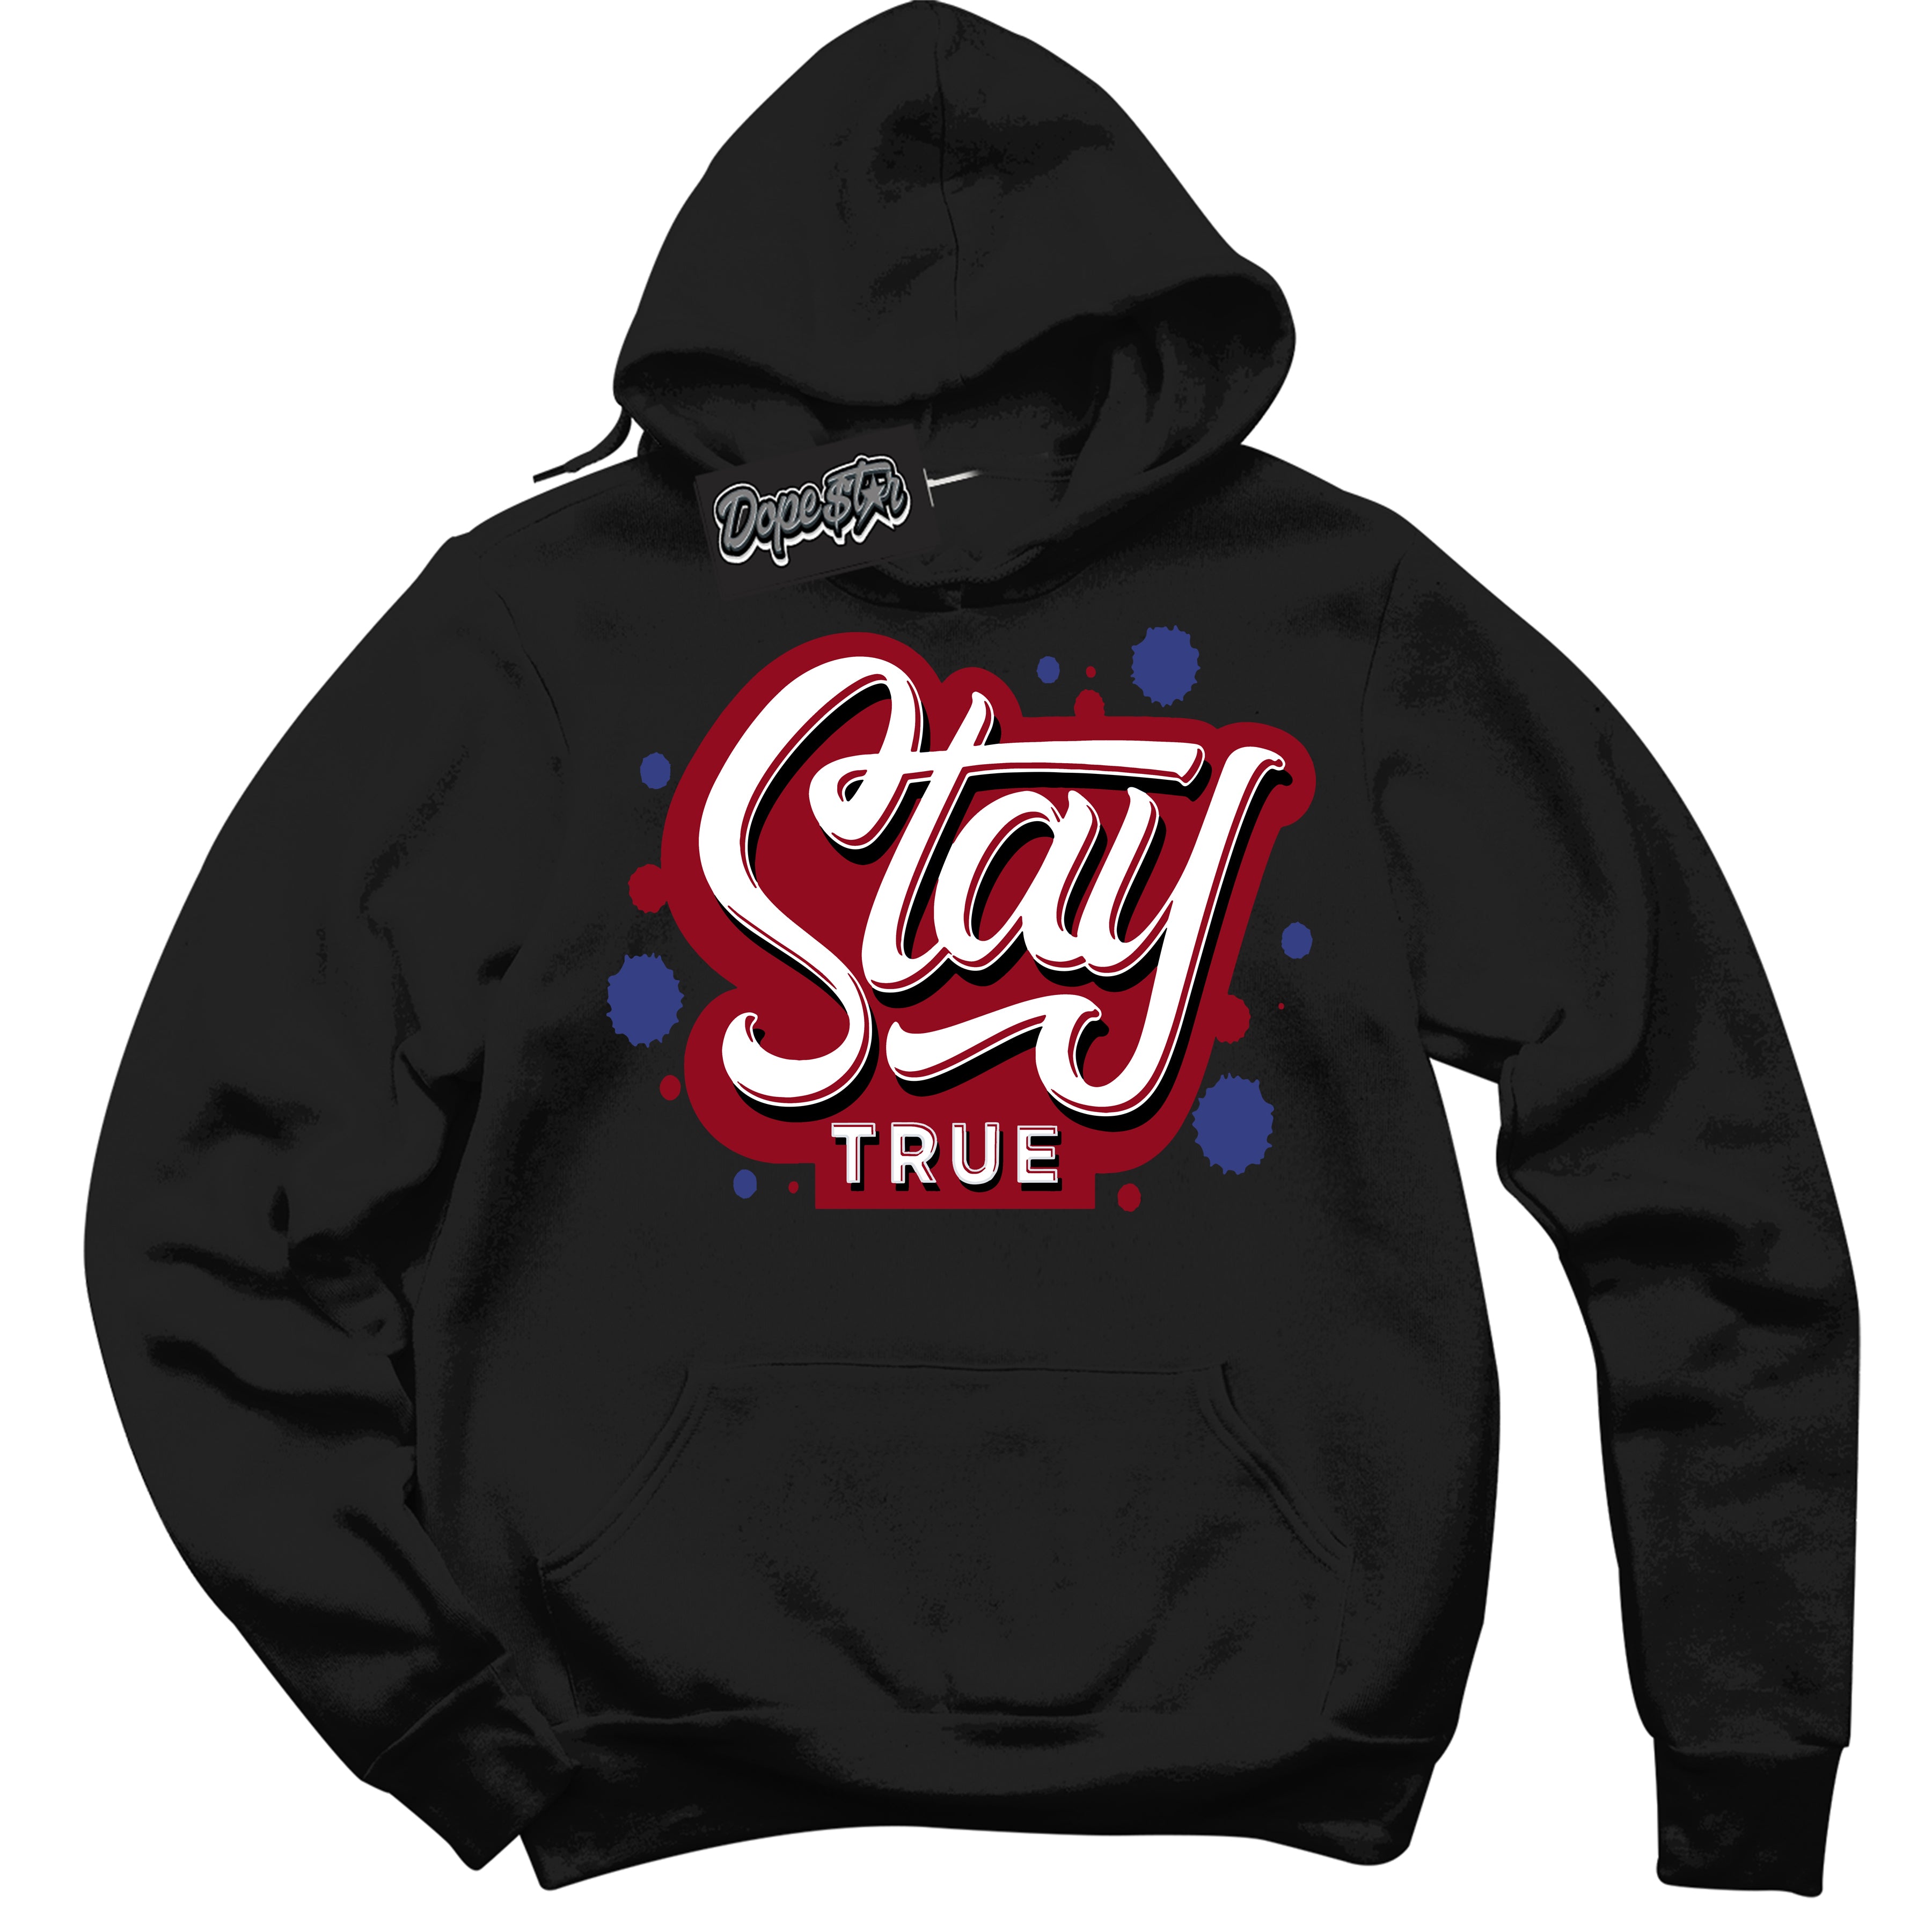 Cool Black Hoodie with “ Stay True ”  design that Perfectly Matches Playoffs 8s Sneakers.